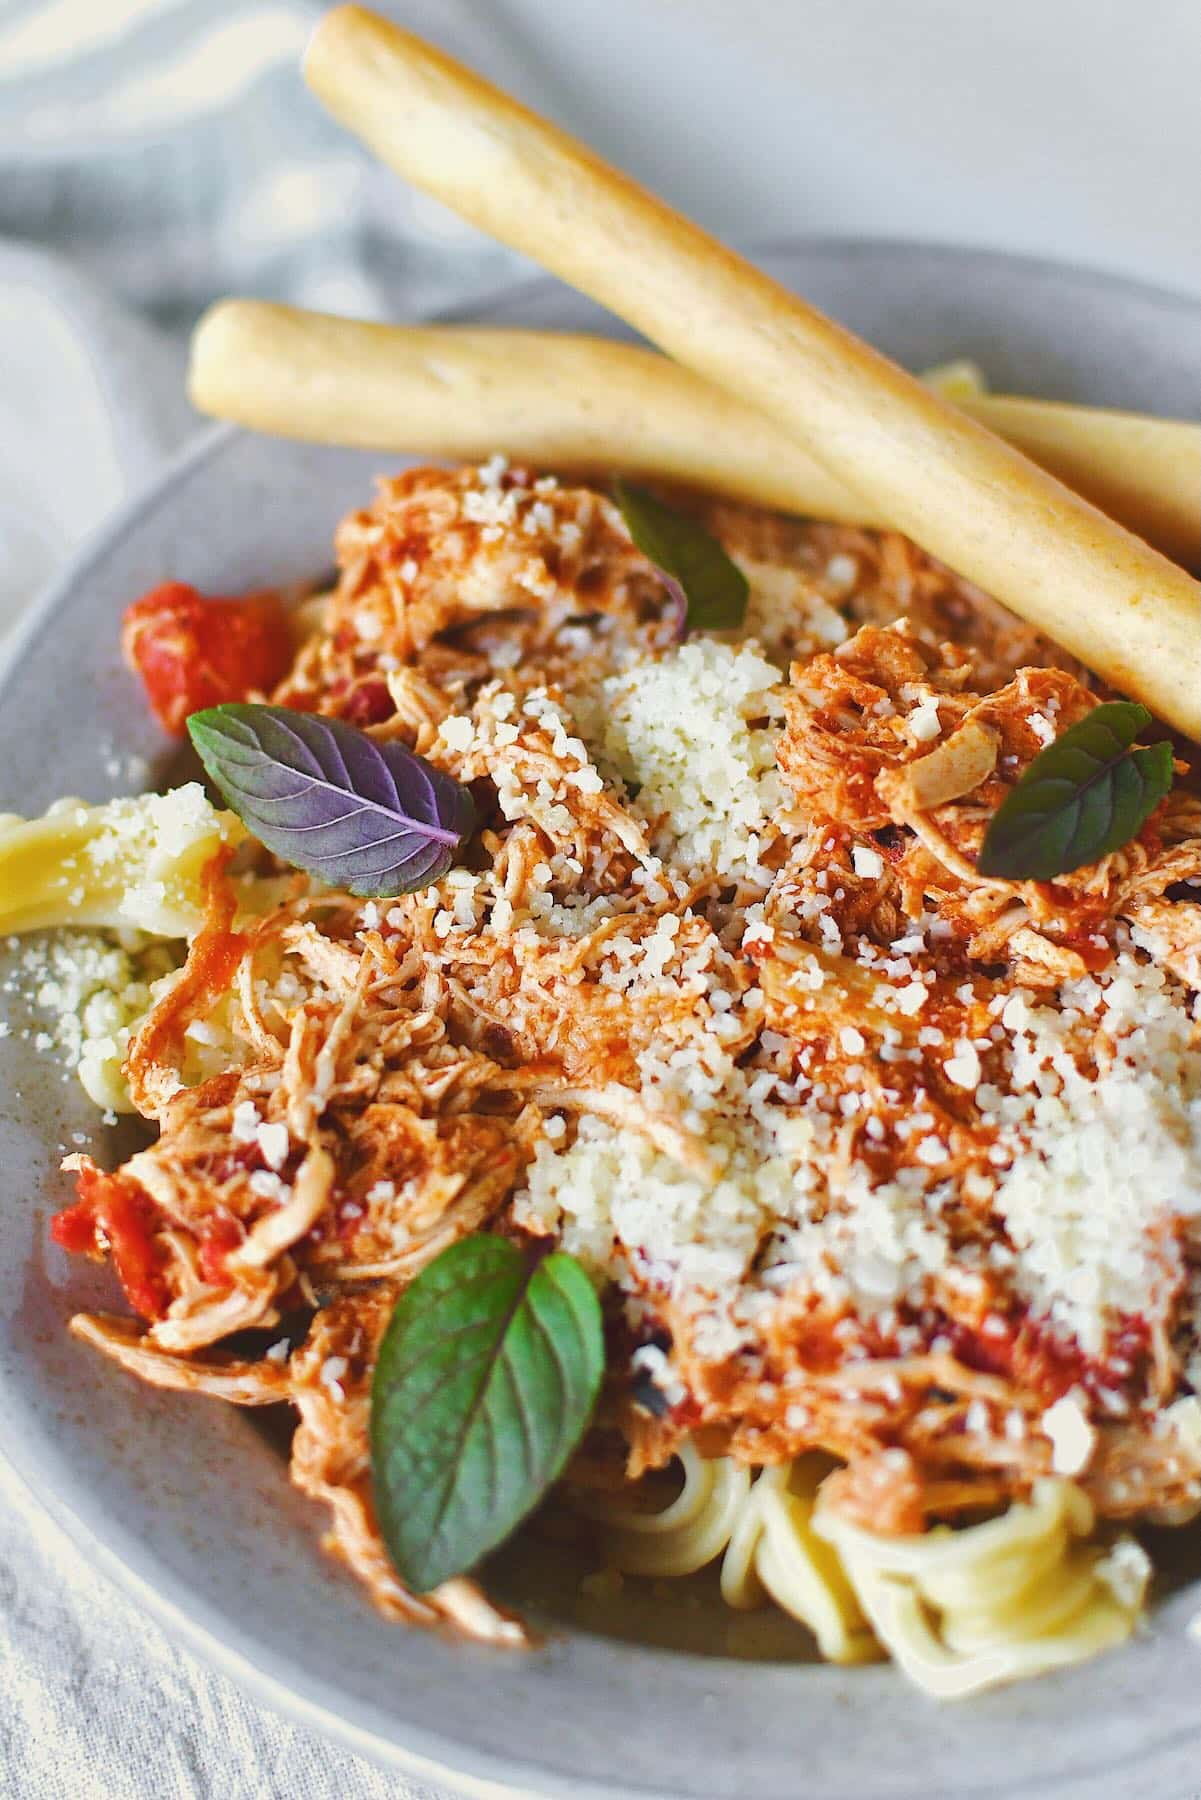 Chicken Marinara served in a bowl over pasta, topped with basil and served with grissini breadstick on the side.